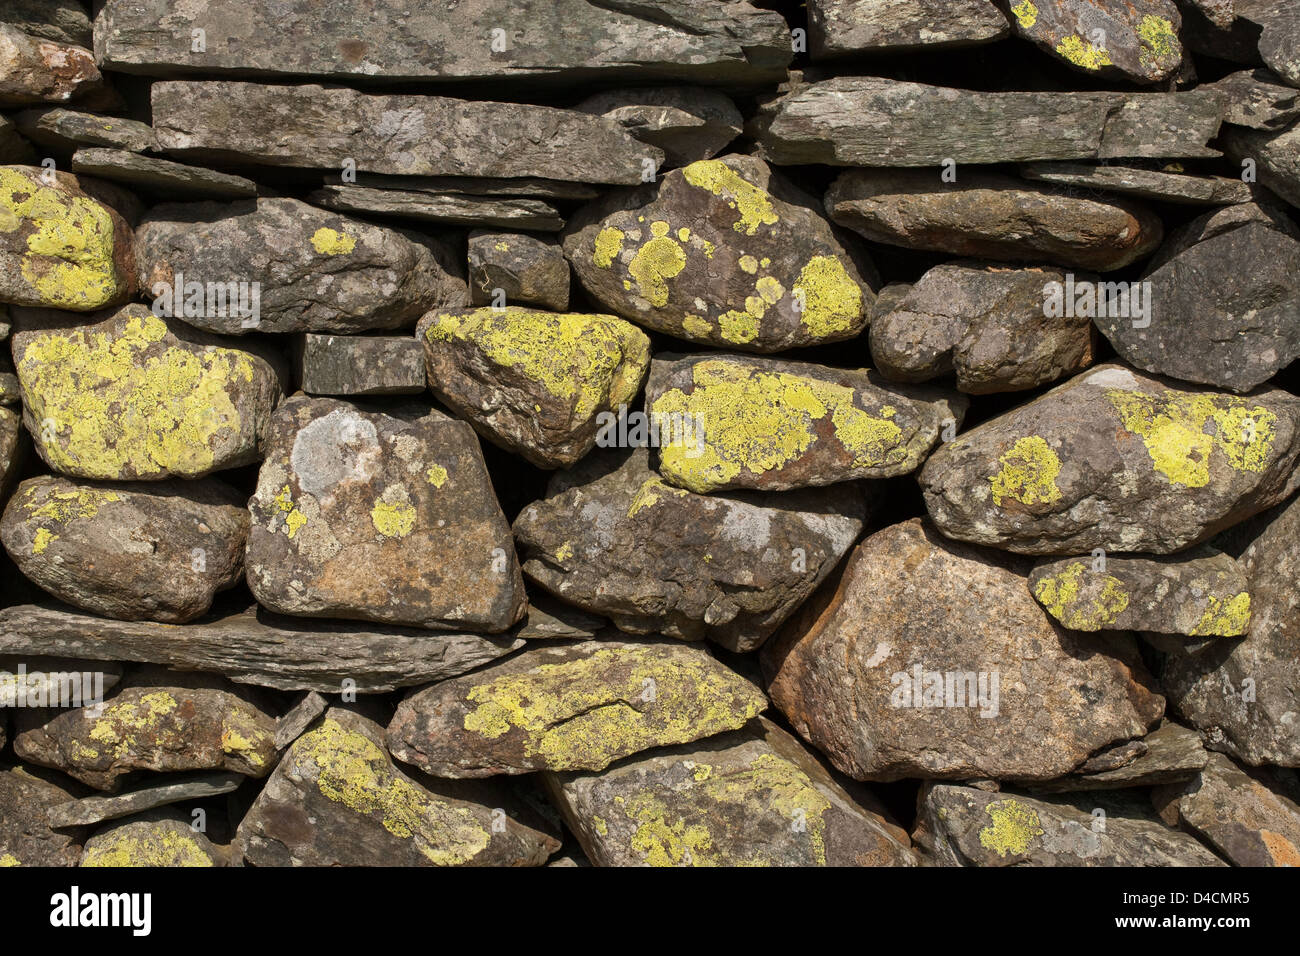 Stone Wall. Lake District National Park. Cumbria. Built to contain farm livestock, mostly sheep (Ovis aries). Stock Photo